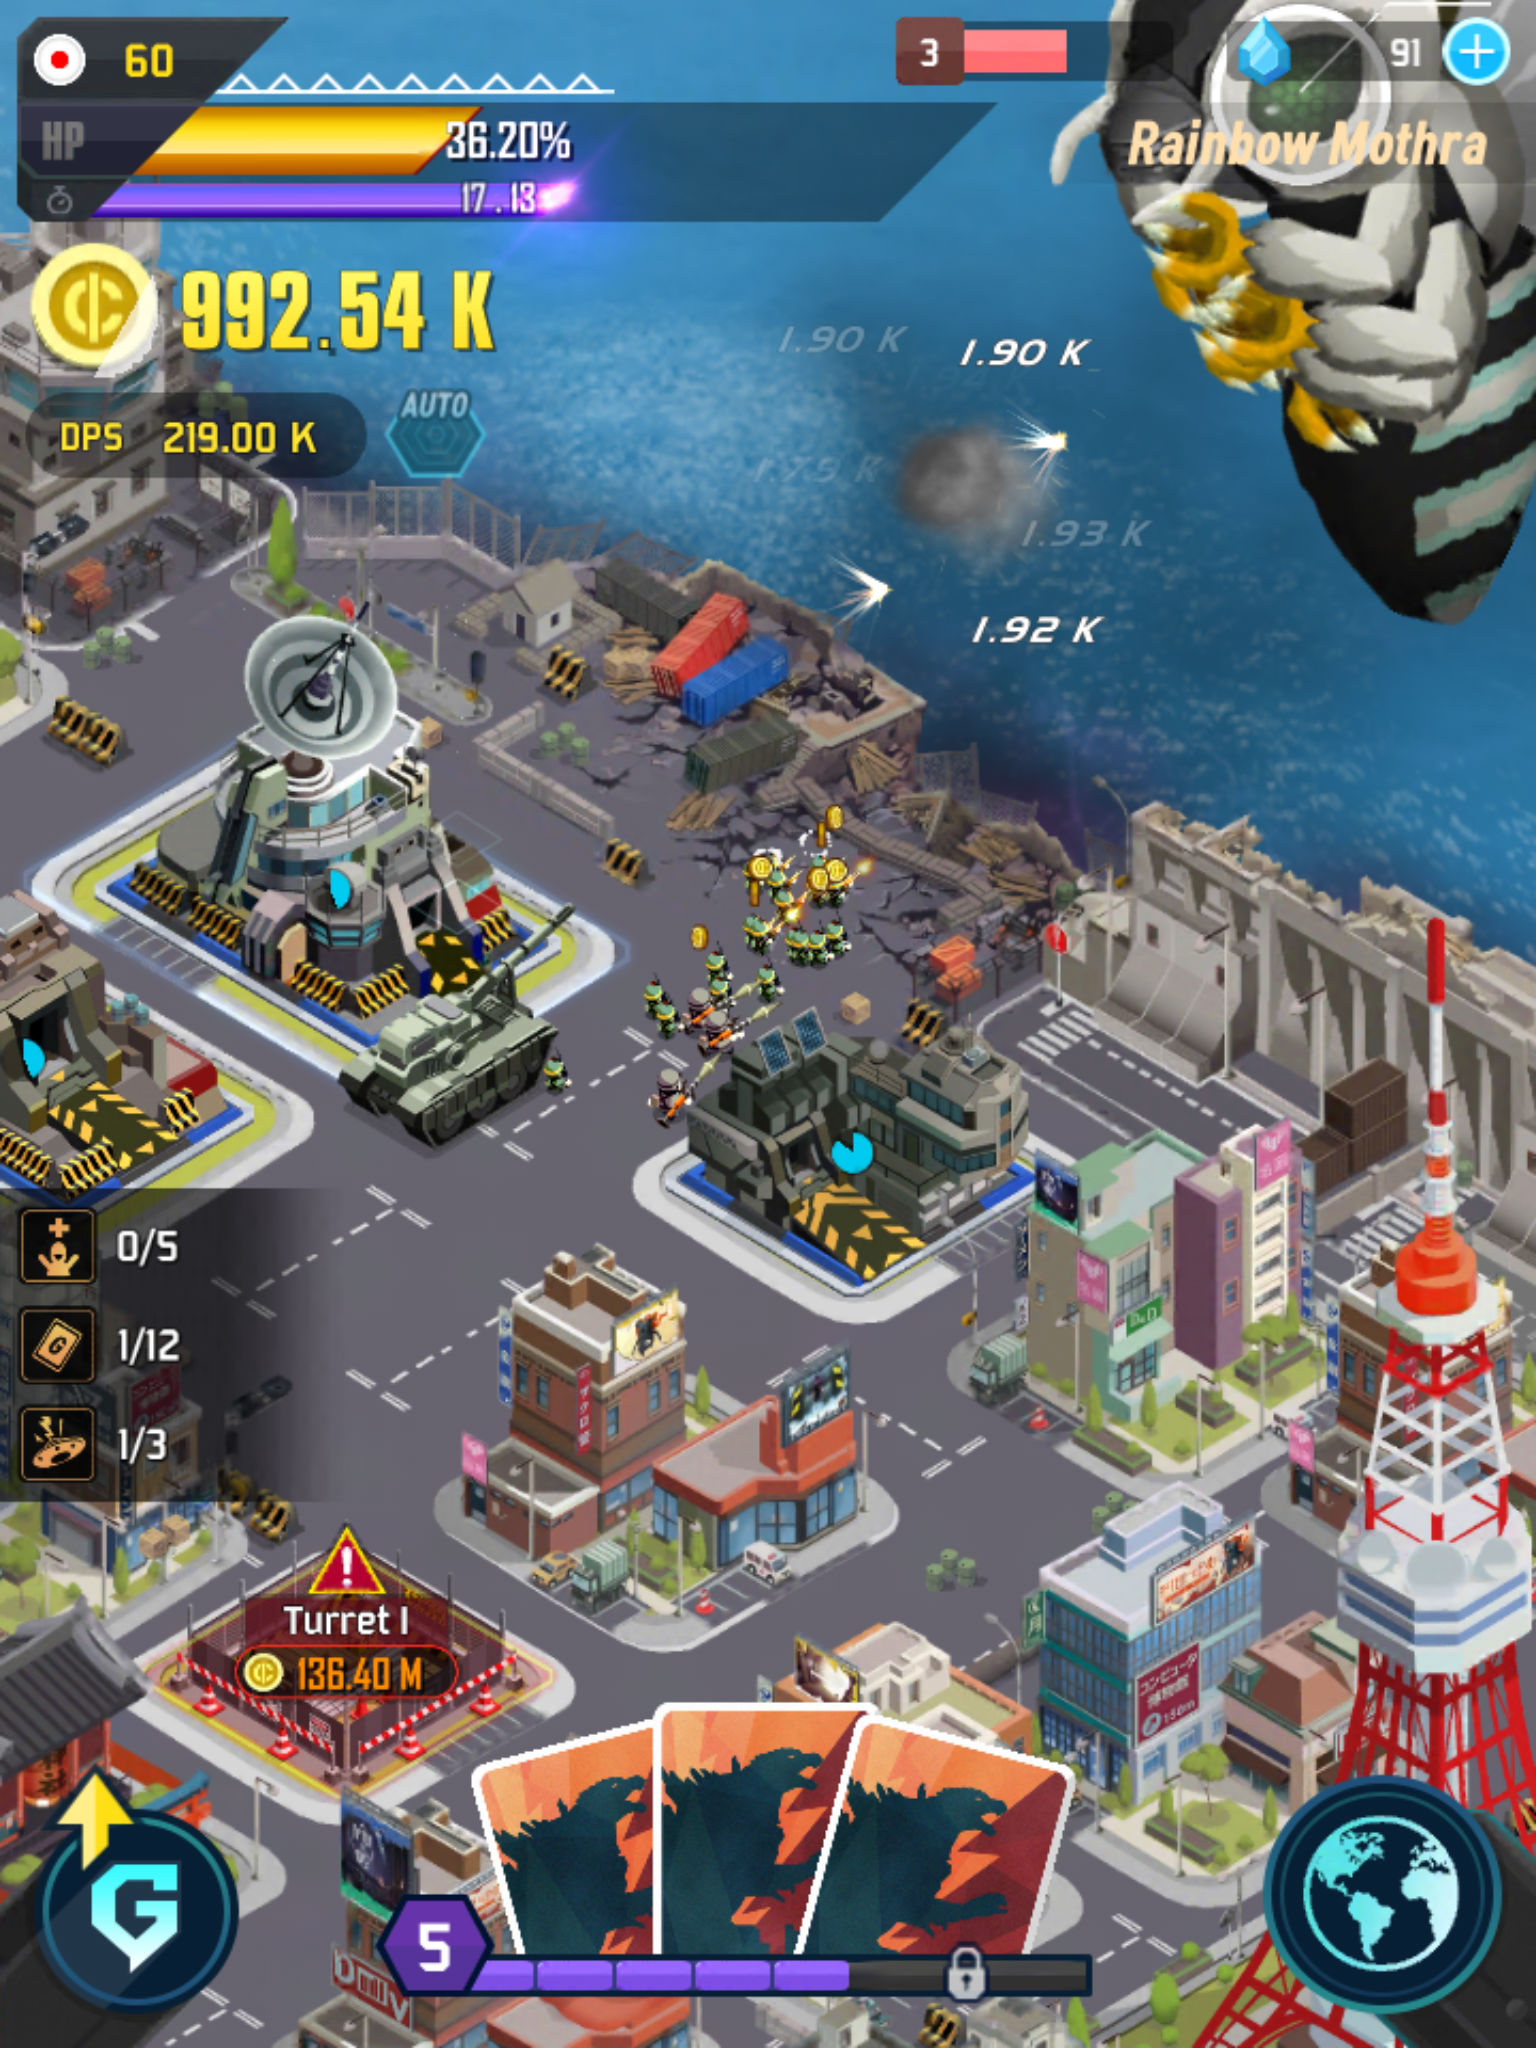 Godzilla Defense Force Guide Tips Tricks And Hints To Kick Kaiju Butt For Free Toucharcade